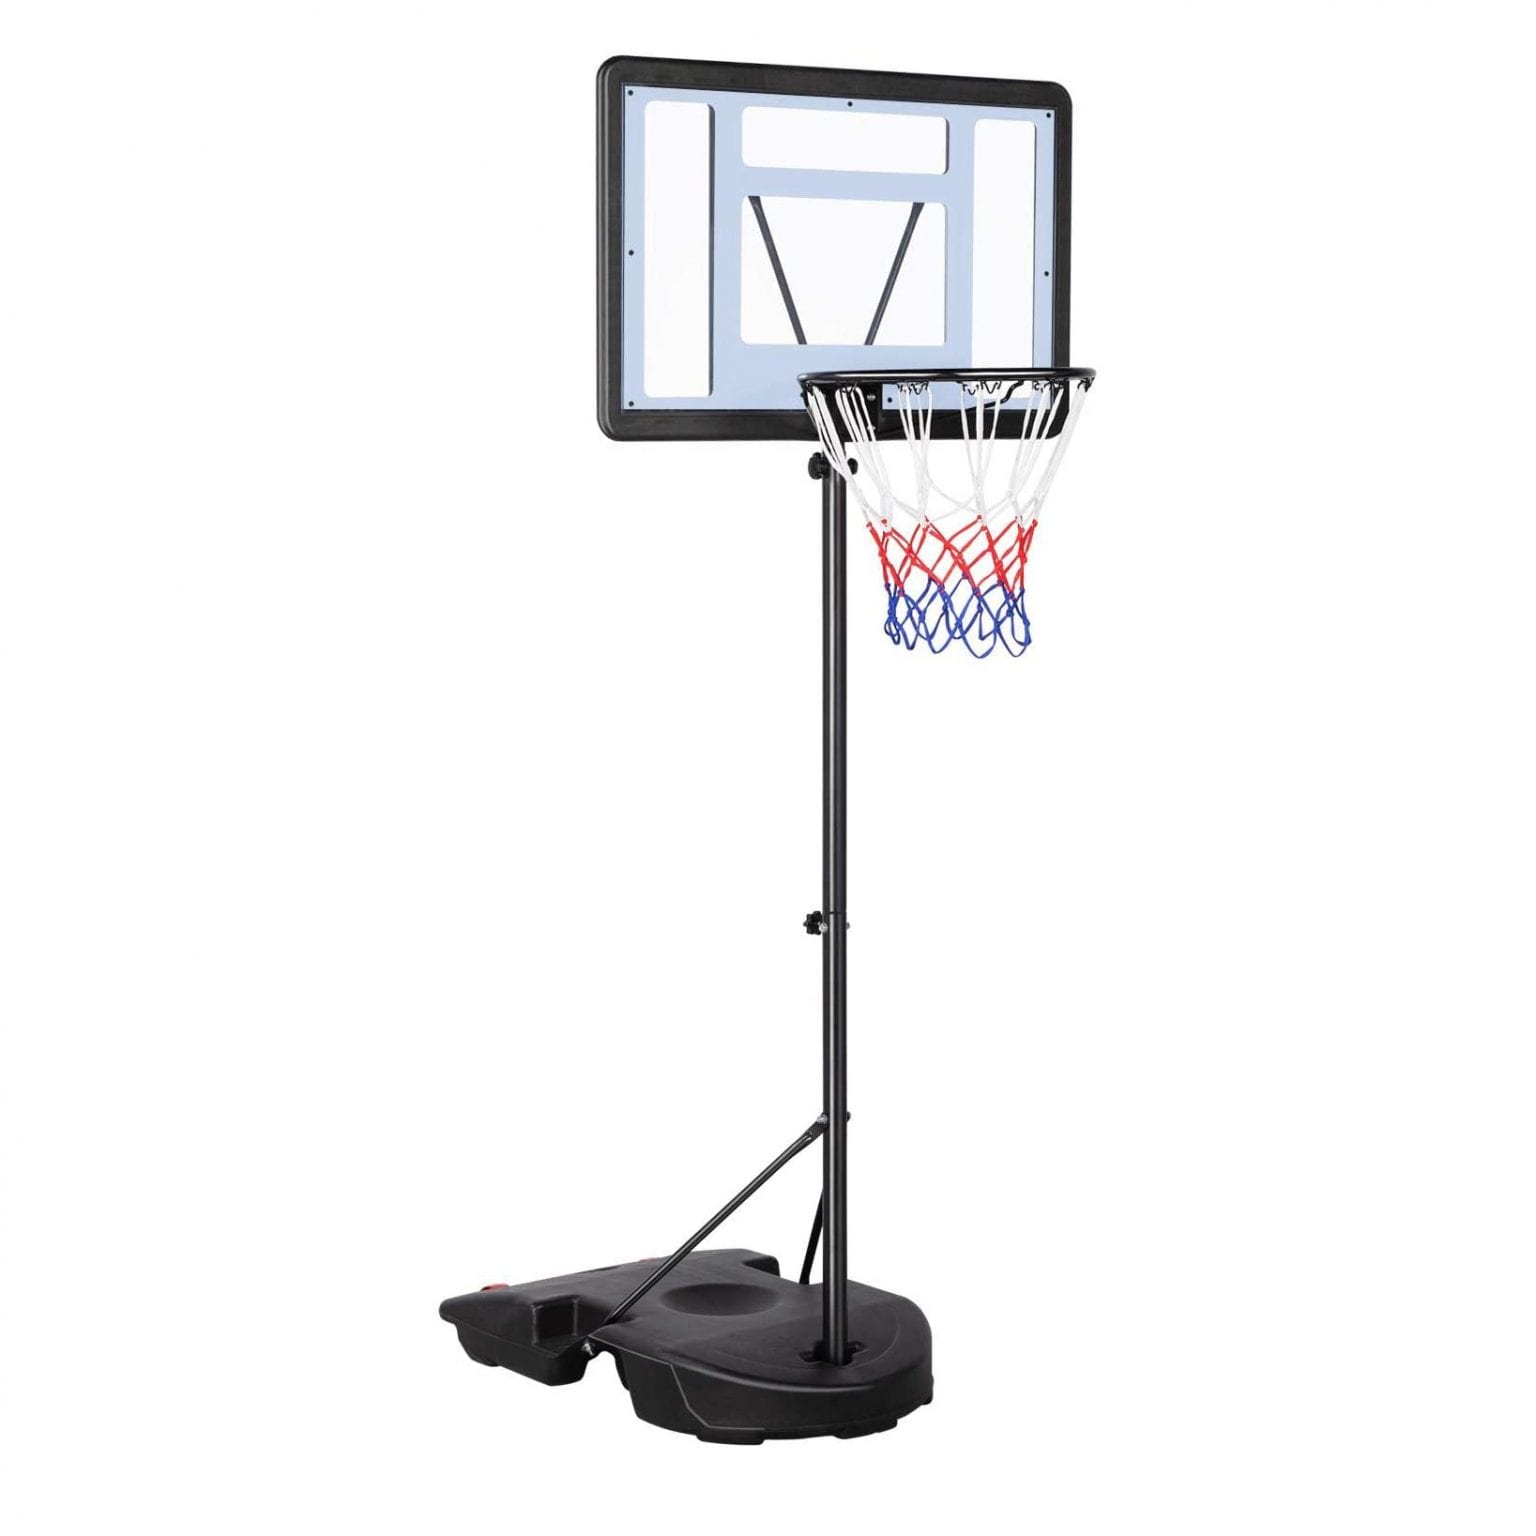 The 10 Best Portable Basketball Hoops In 2022 Reviews